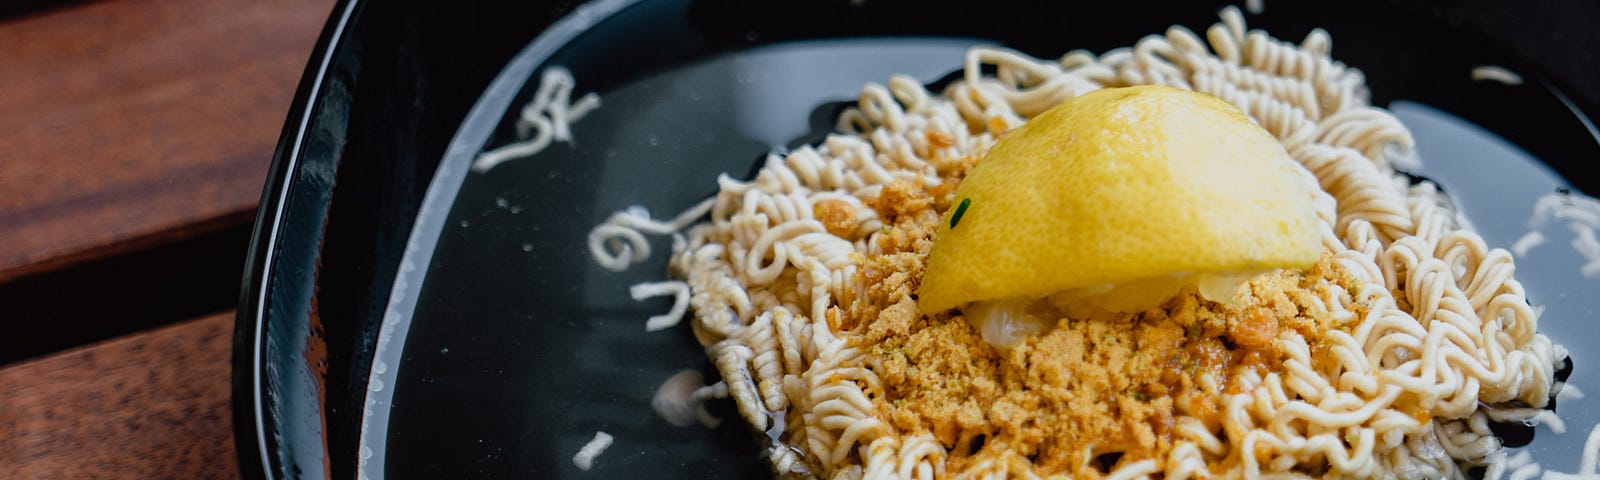 A block of uncooked ramen noodles in a bowl with a lemon wedge smashed on top